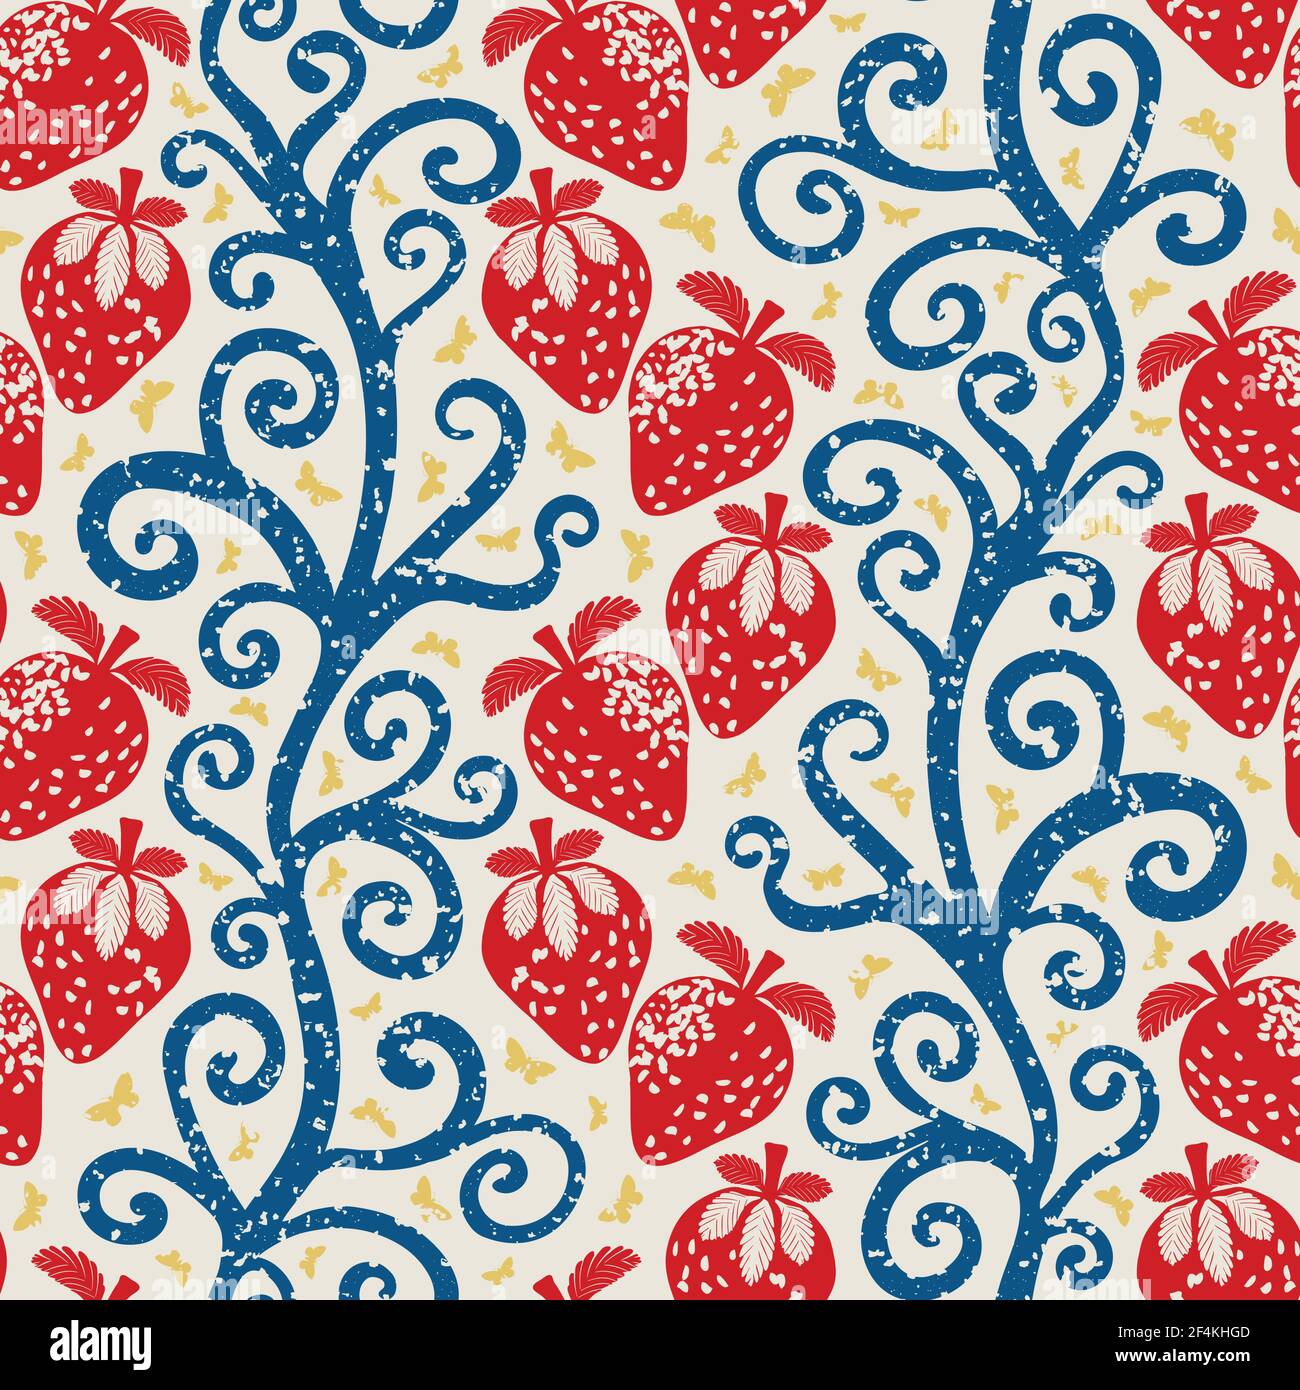 Strawberry linocut Indian Florals style seamless vector pattern background. Winding stems with berries and butterflies. Red blue yellow white design Stock Vector